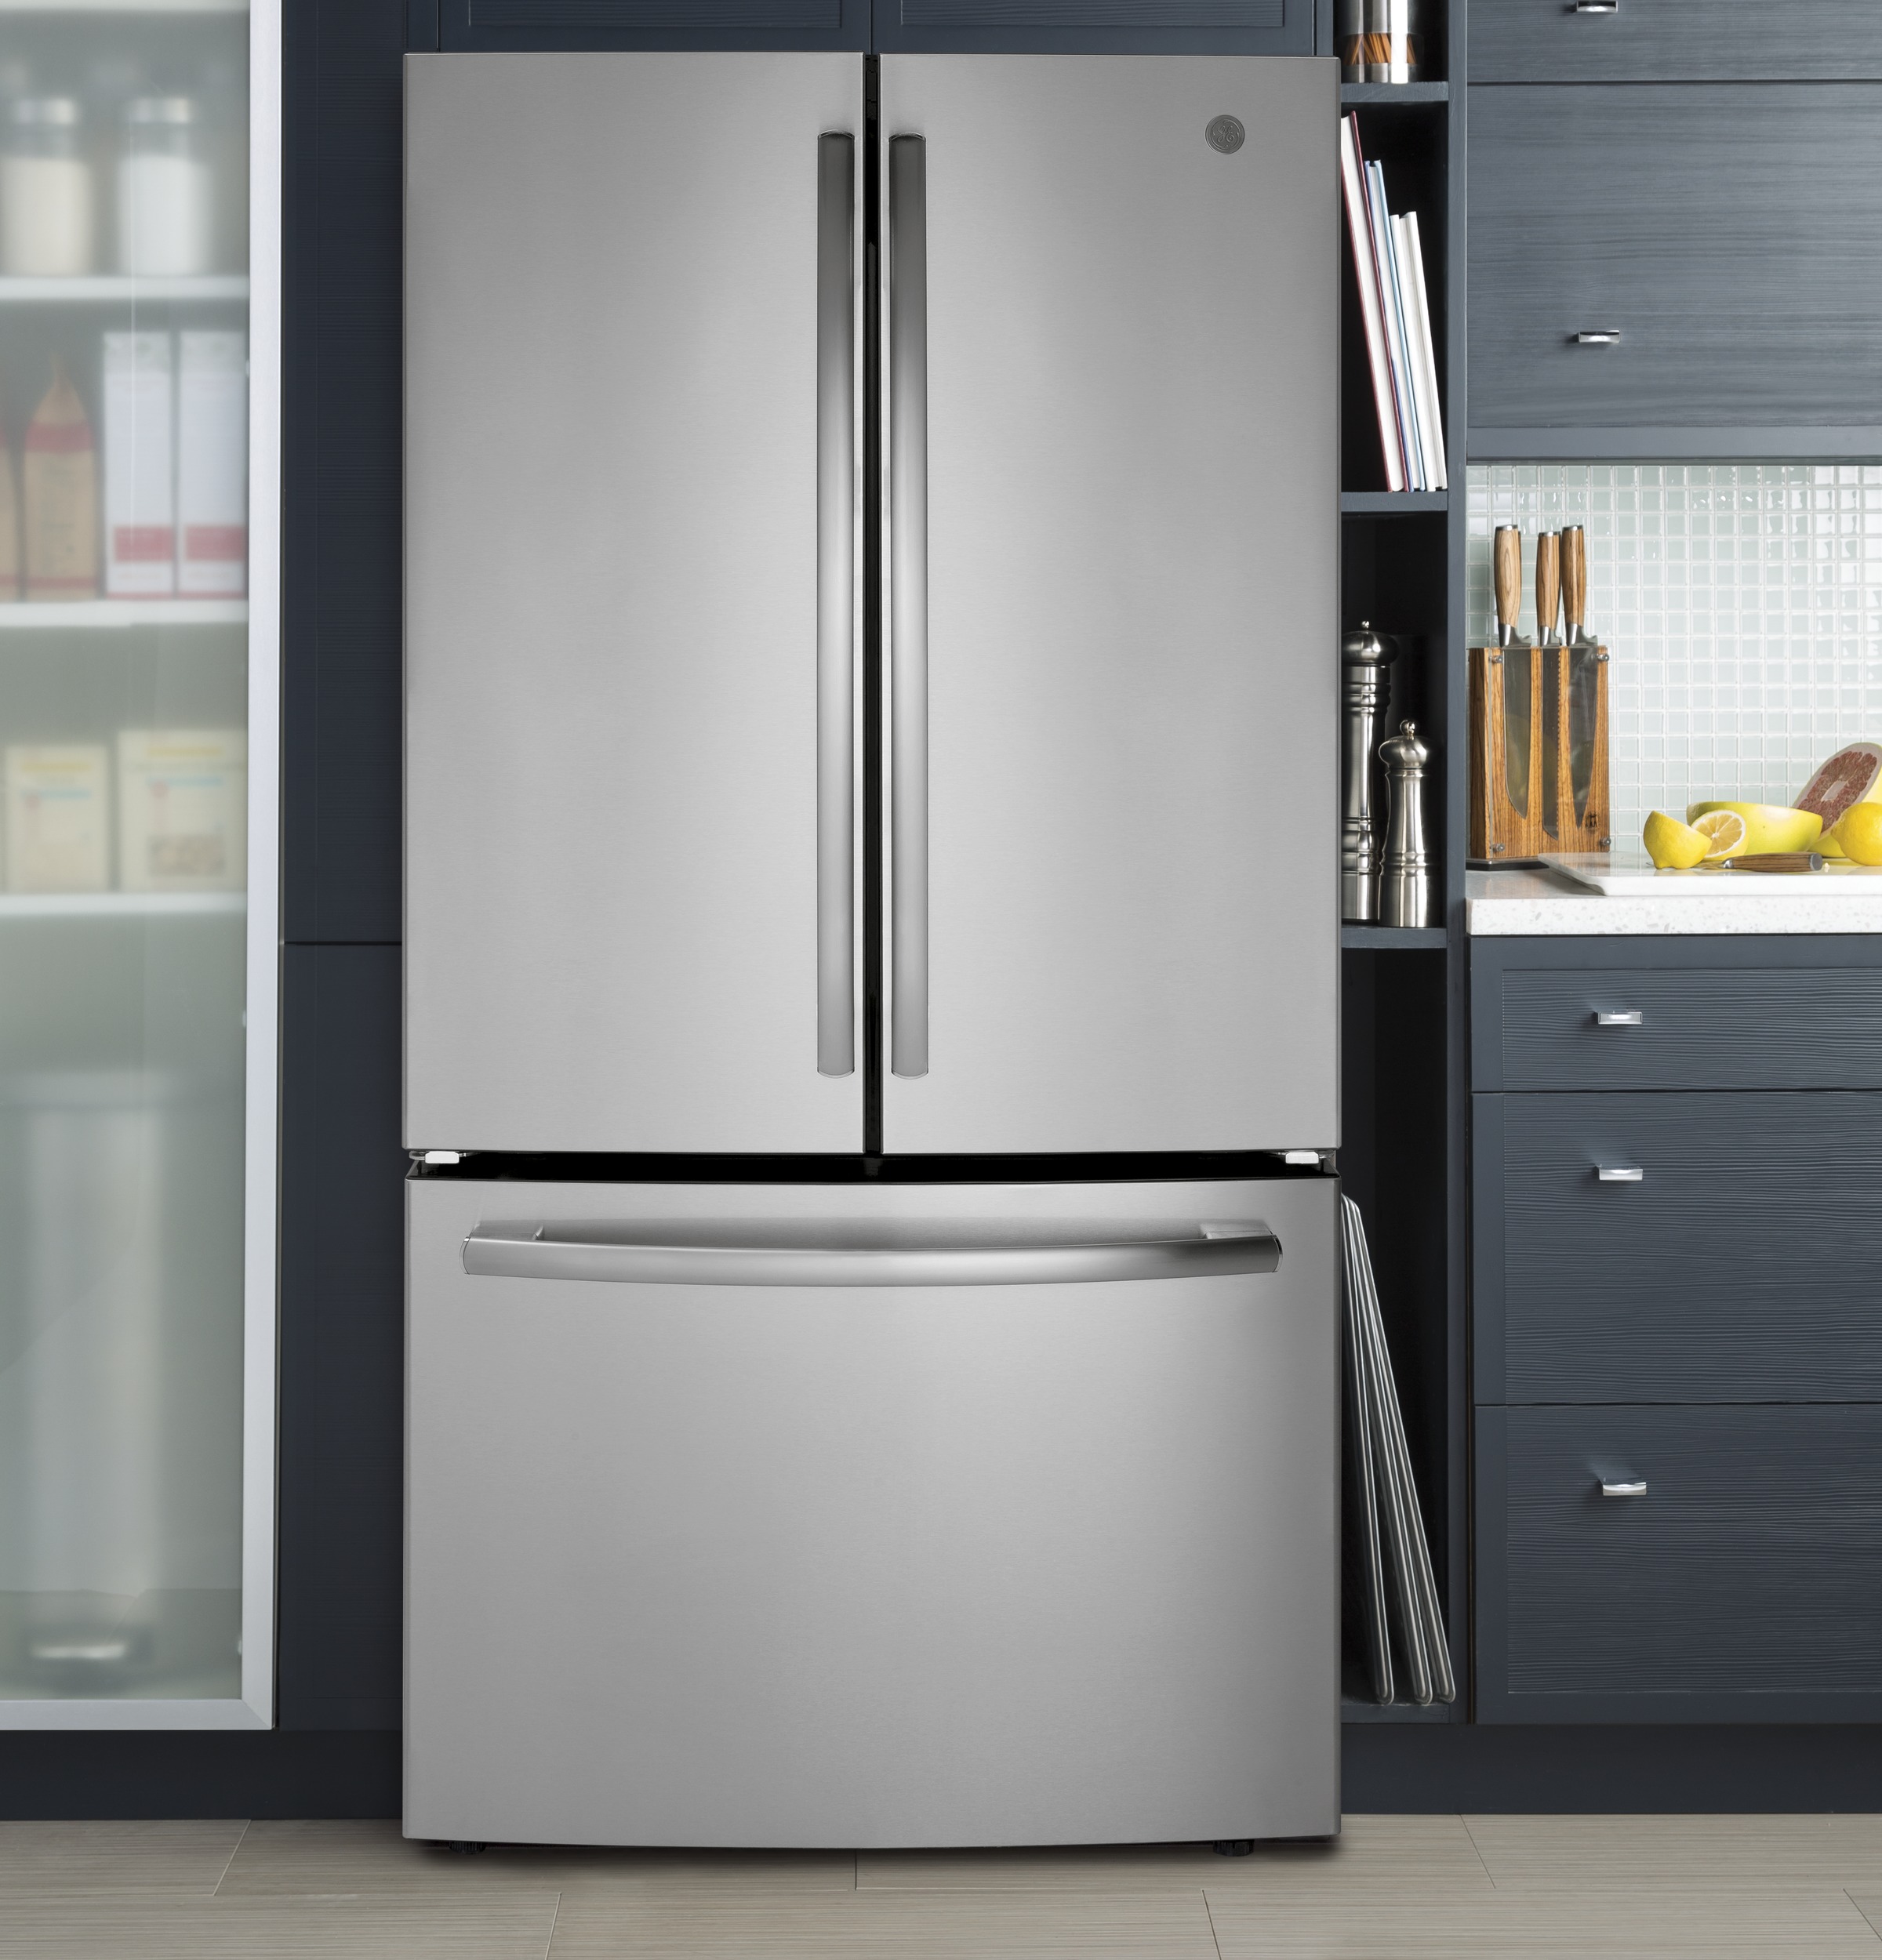 Customer Reviews GE 27 Cu. Ft. French Door Refrigerator Stainless